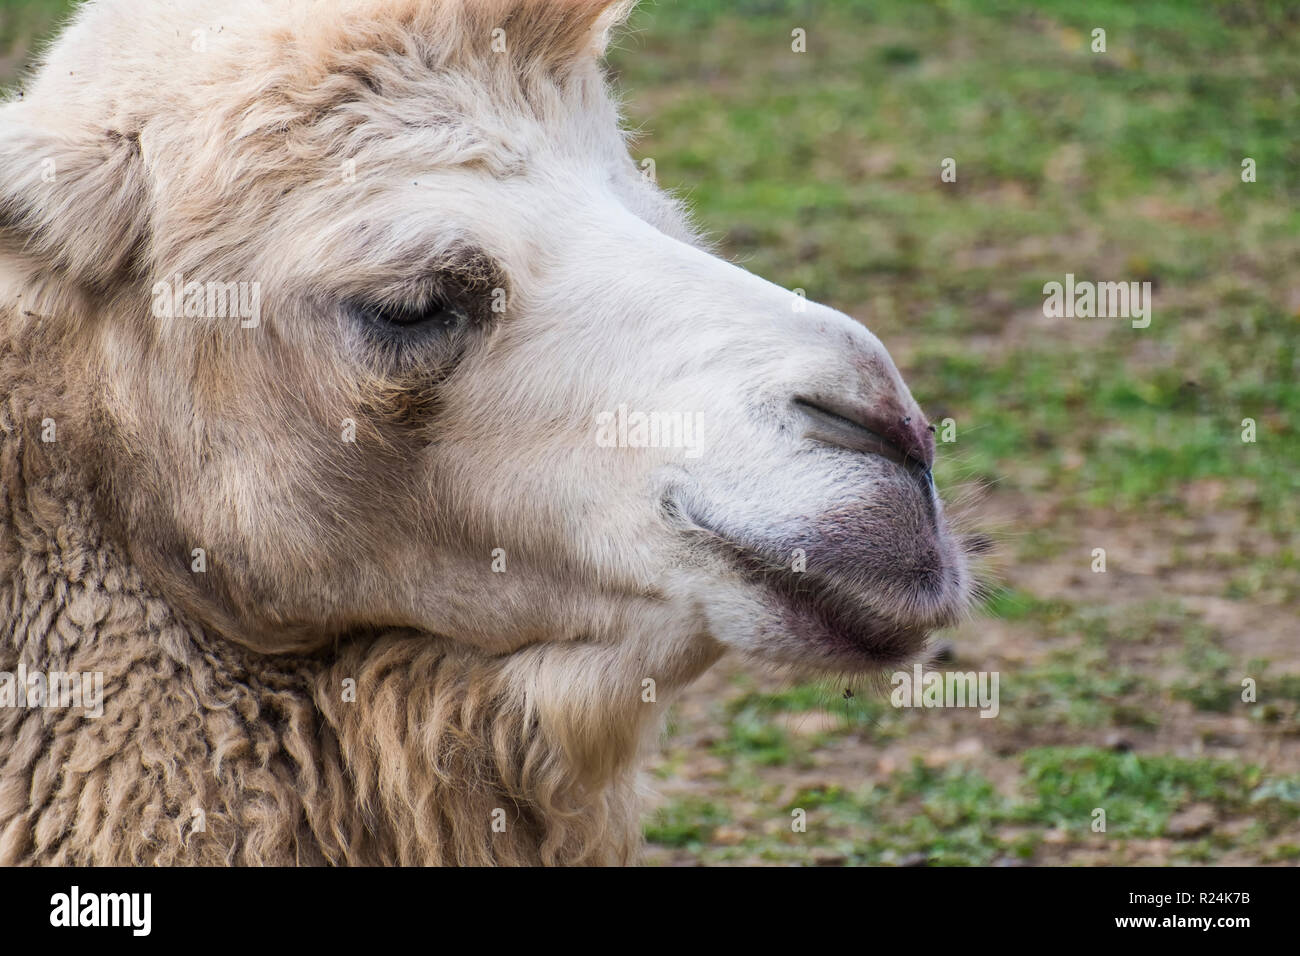 Head of white Bactrian camel close up (Camelus bactrianus) Stock Photo